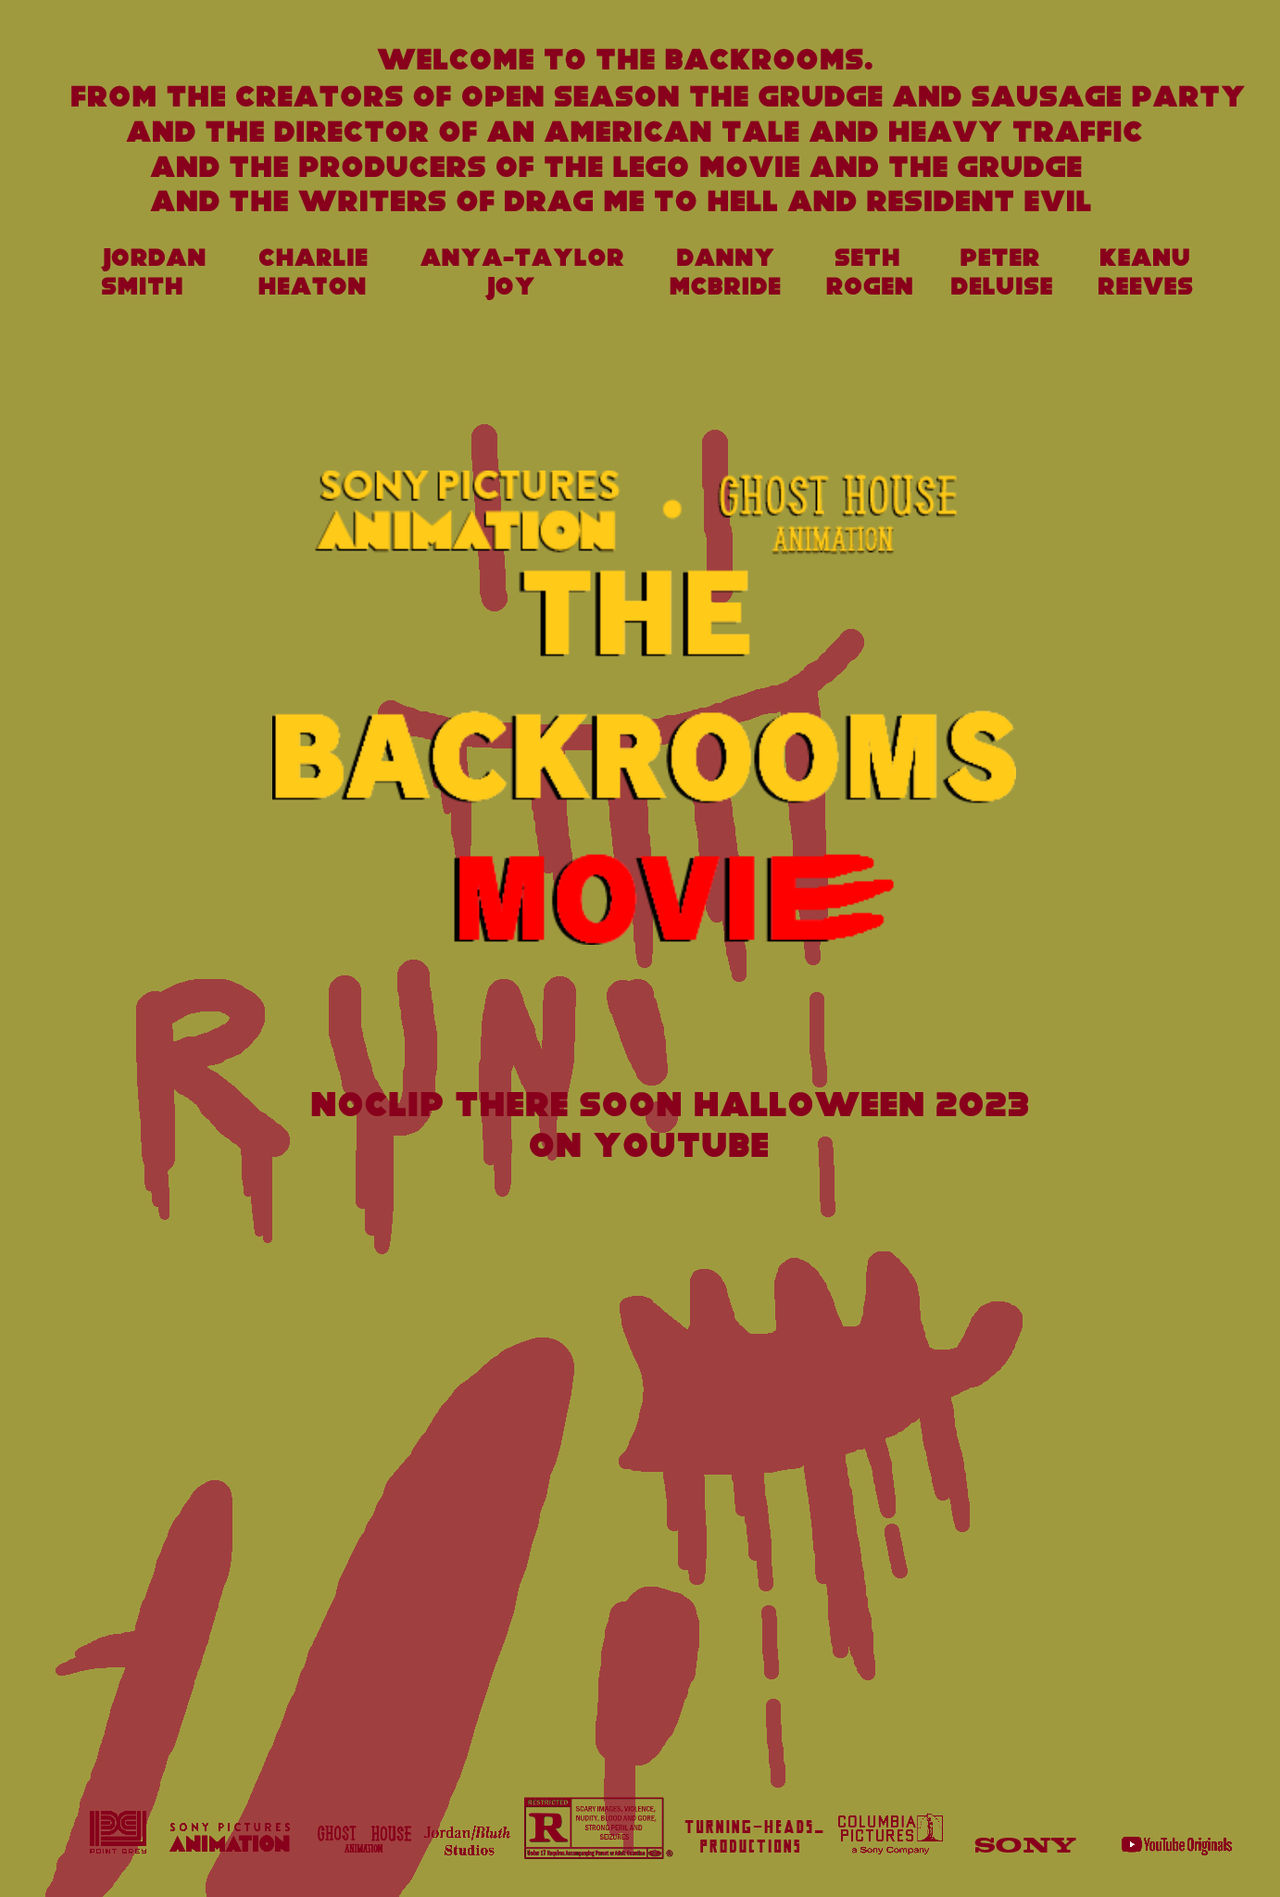 The Backrooms Movie Upcoming Poster by Tarzan-undertail990 on DeviantArt